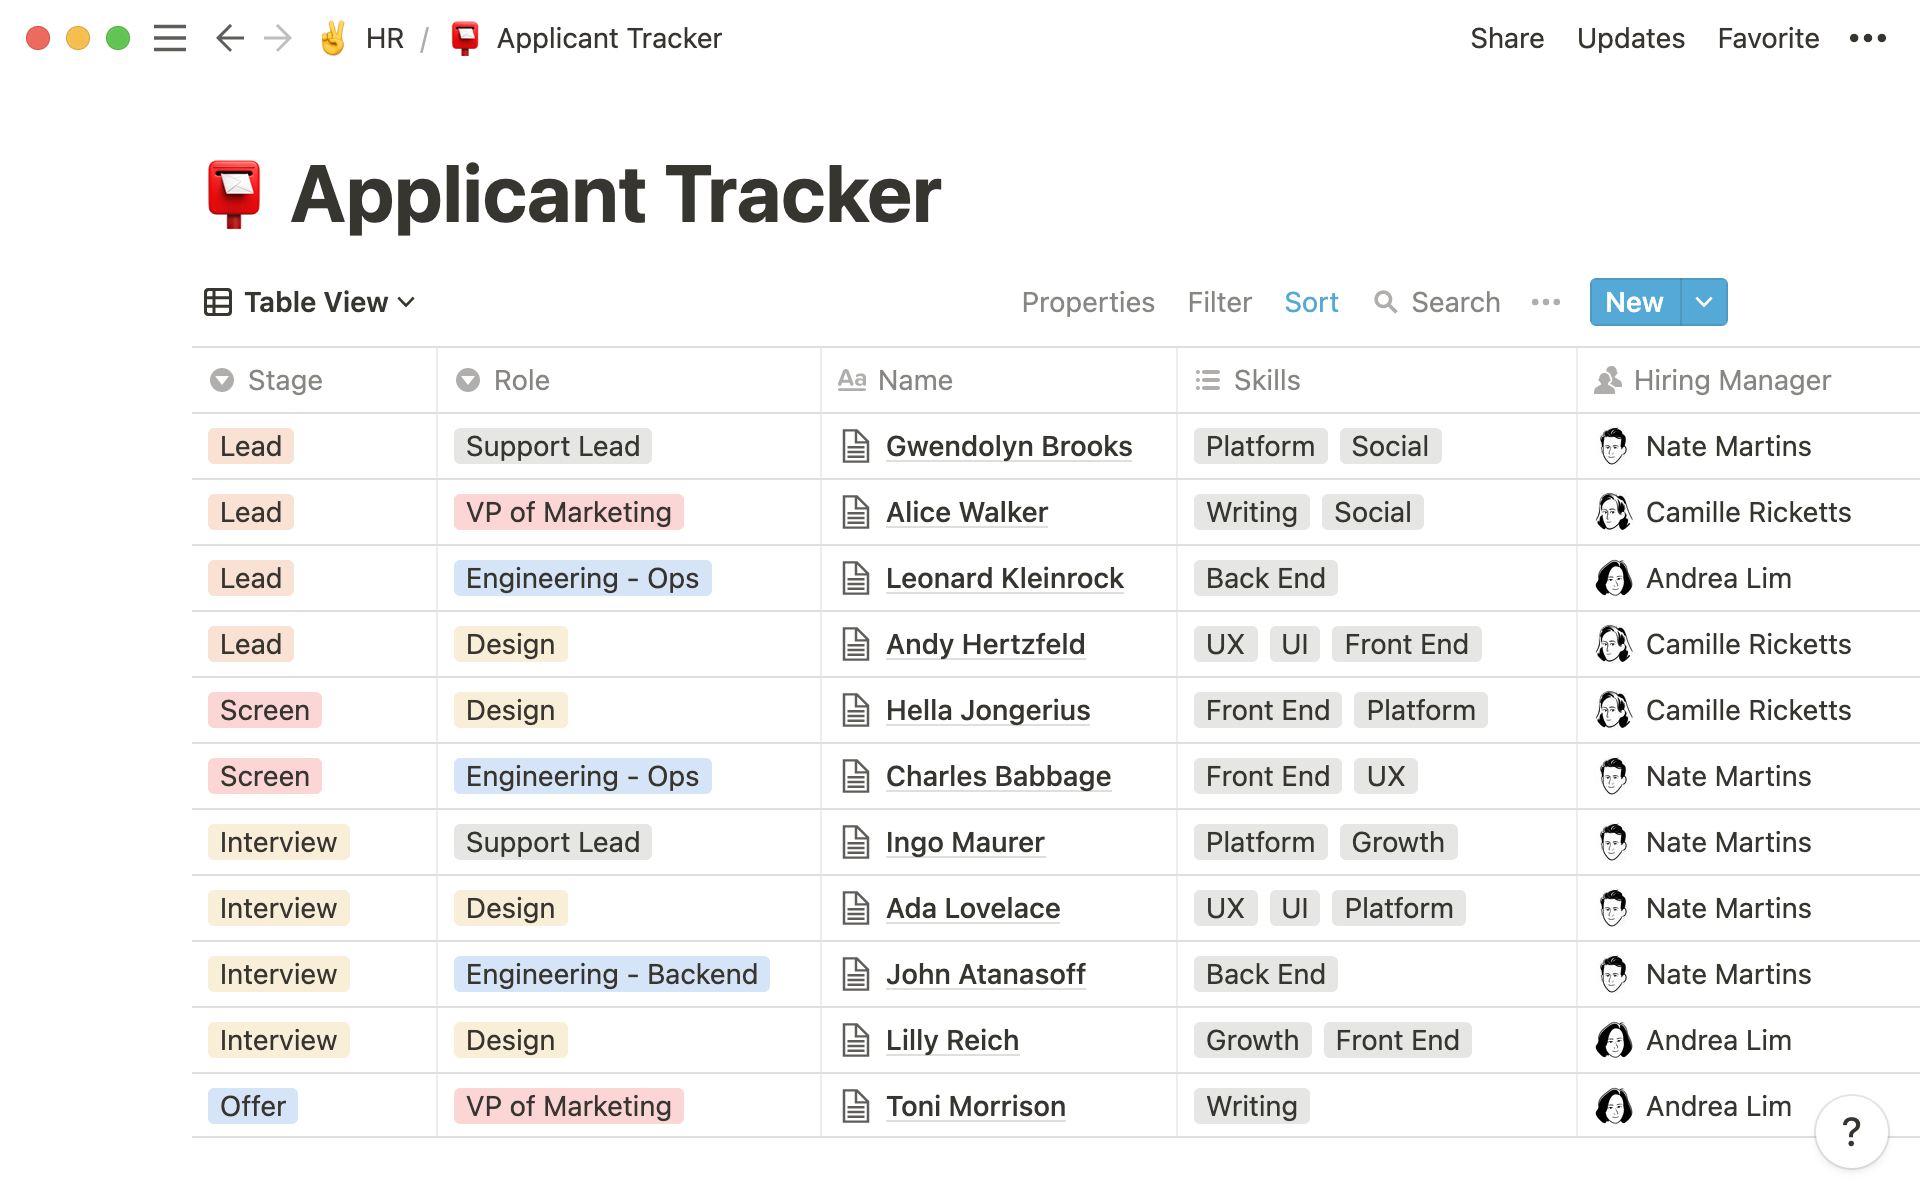 You can see the use of Select (“Stage” and “Role”), Multi-select (“Skills”), and Person (“Hiring Manager”) properties in this applicant tracking database.